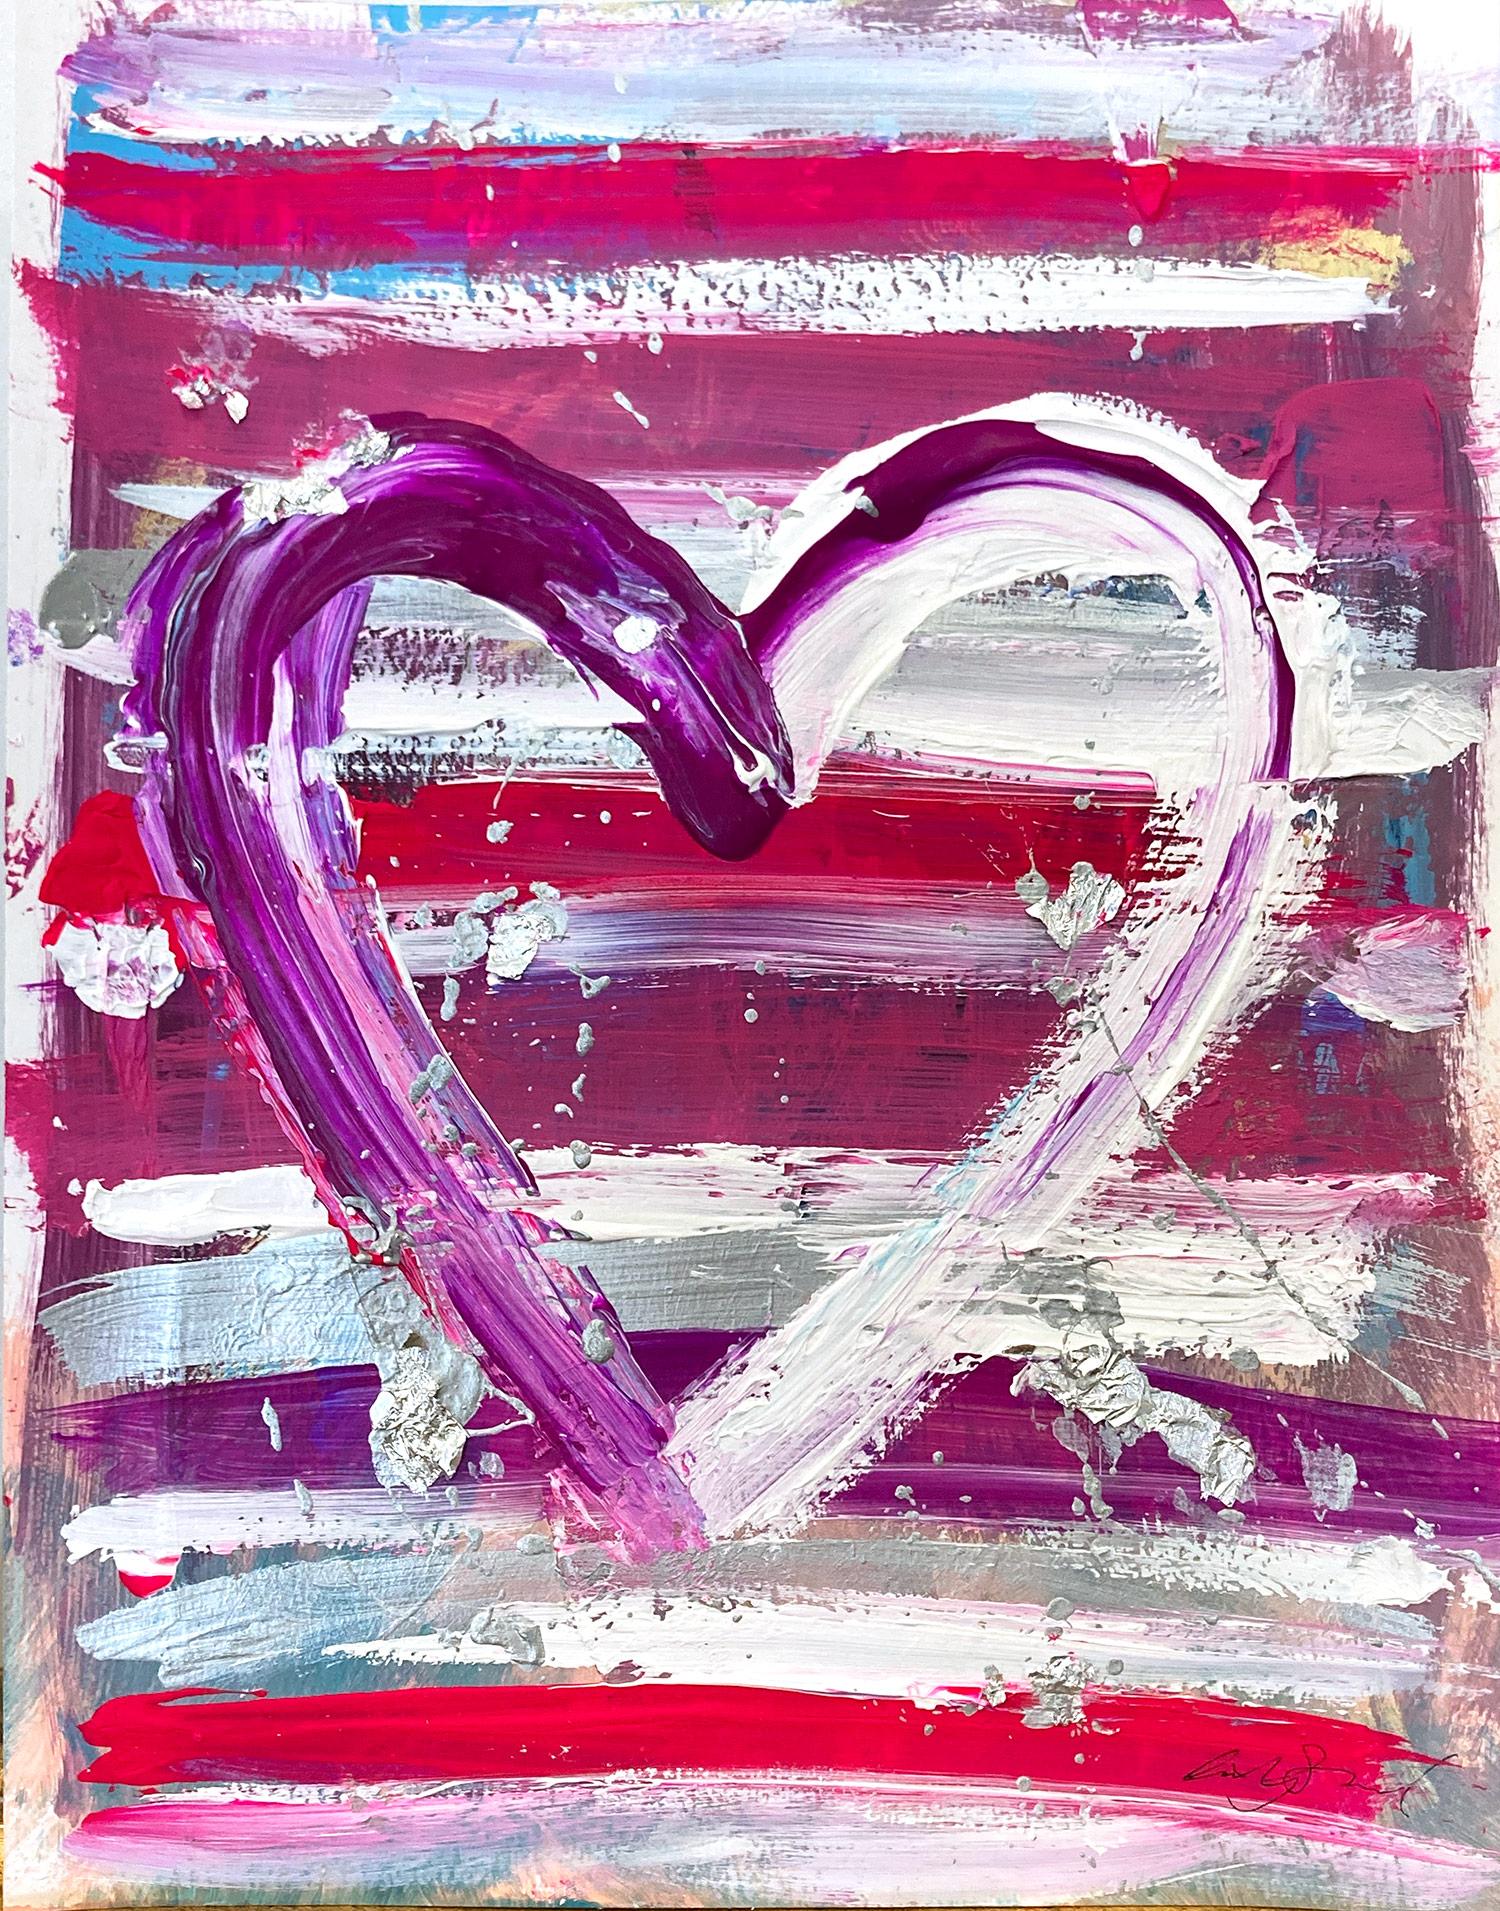 "My Royal Heart" Colorful Abstract Acrylic & Silver Leaf Painting on Paper 